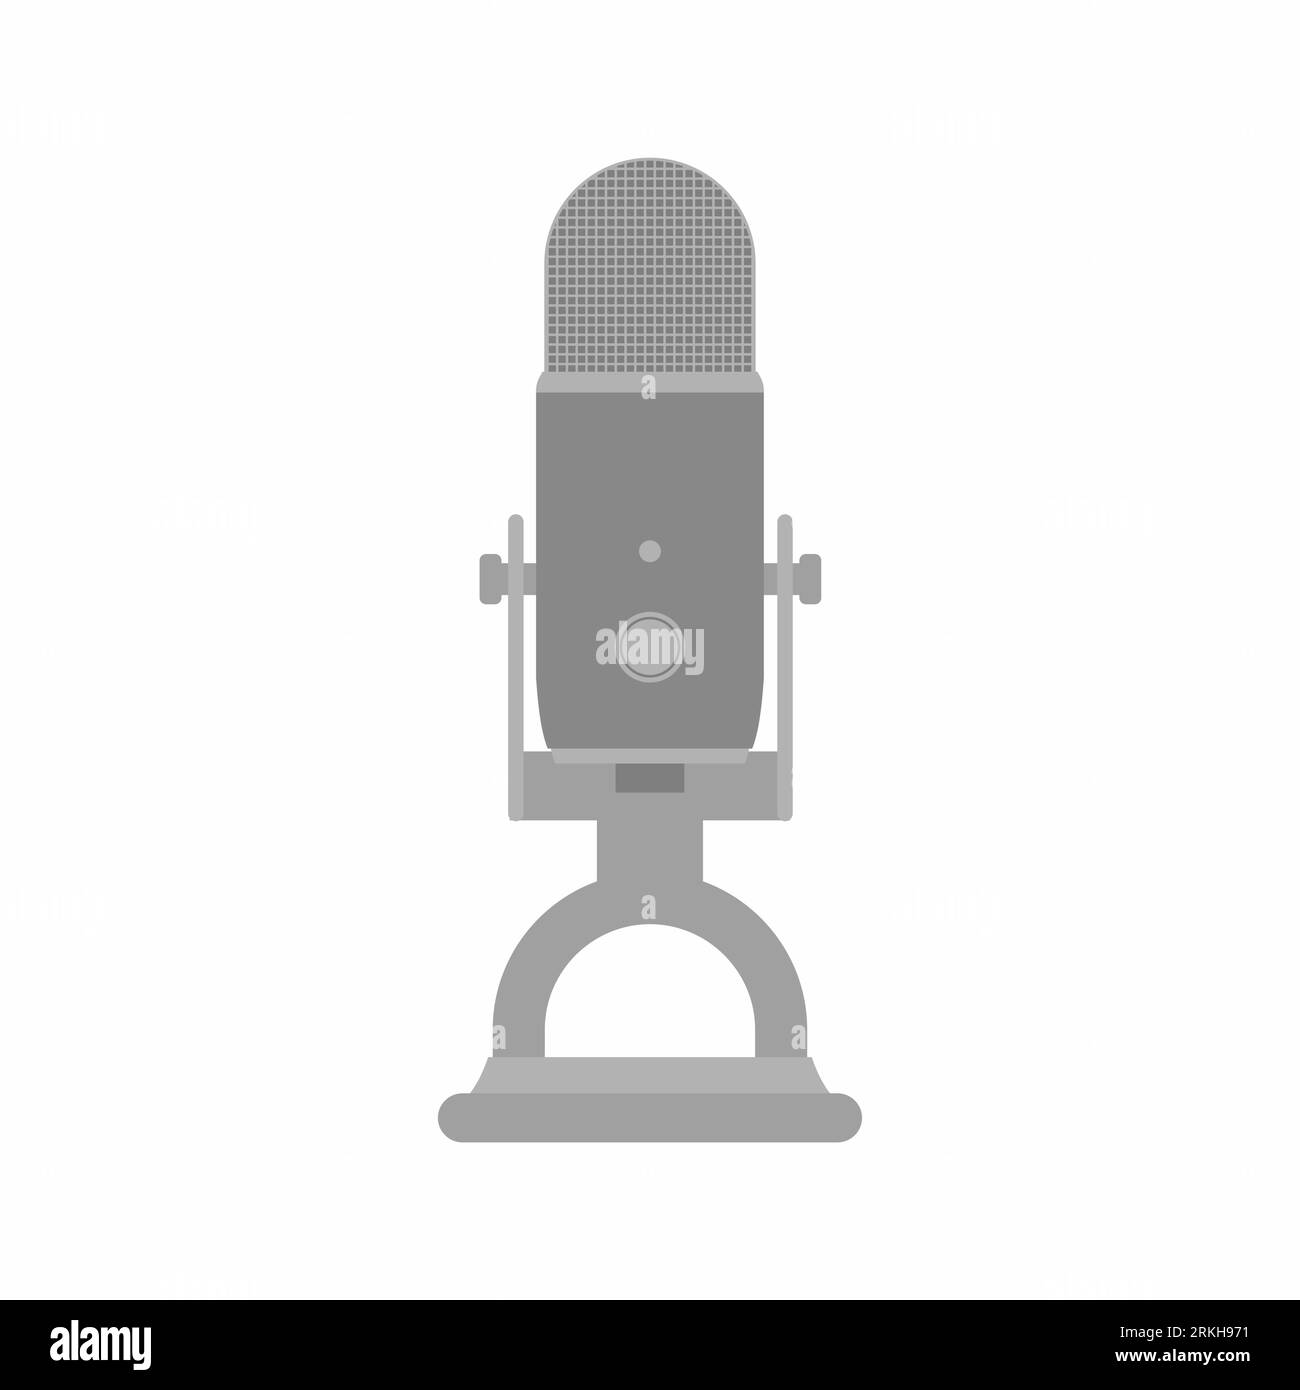 Podcast radio icon illustration. Blue Yeti microphone record studio devices. News, radio and television broadcasting isolated design element. Podcast, Stock Vector